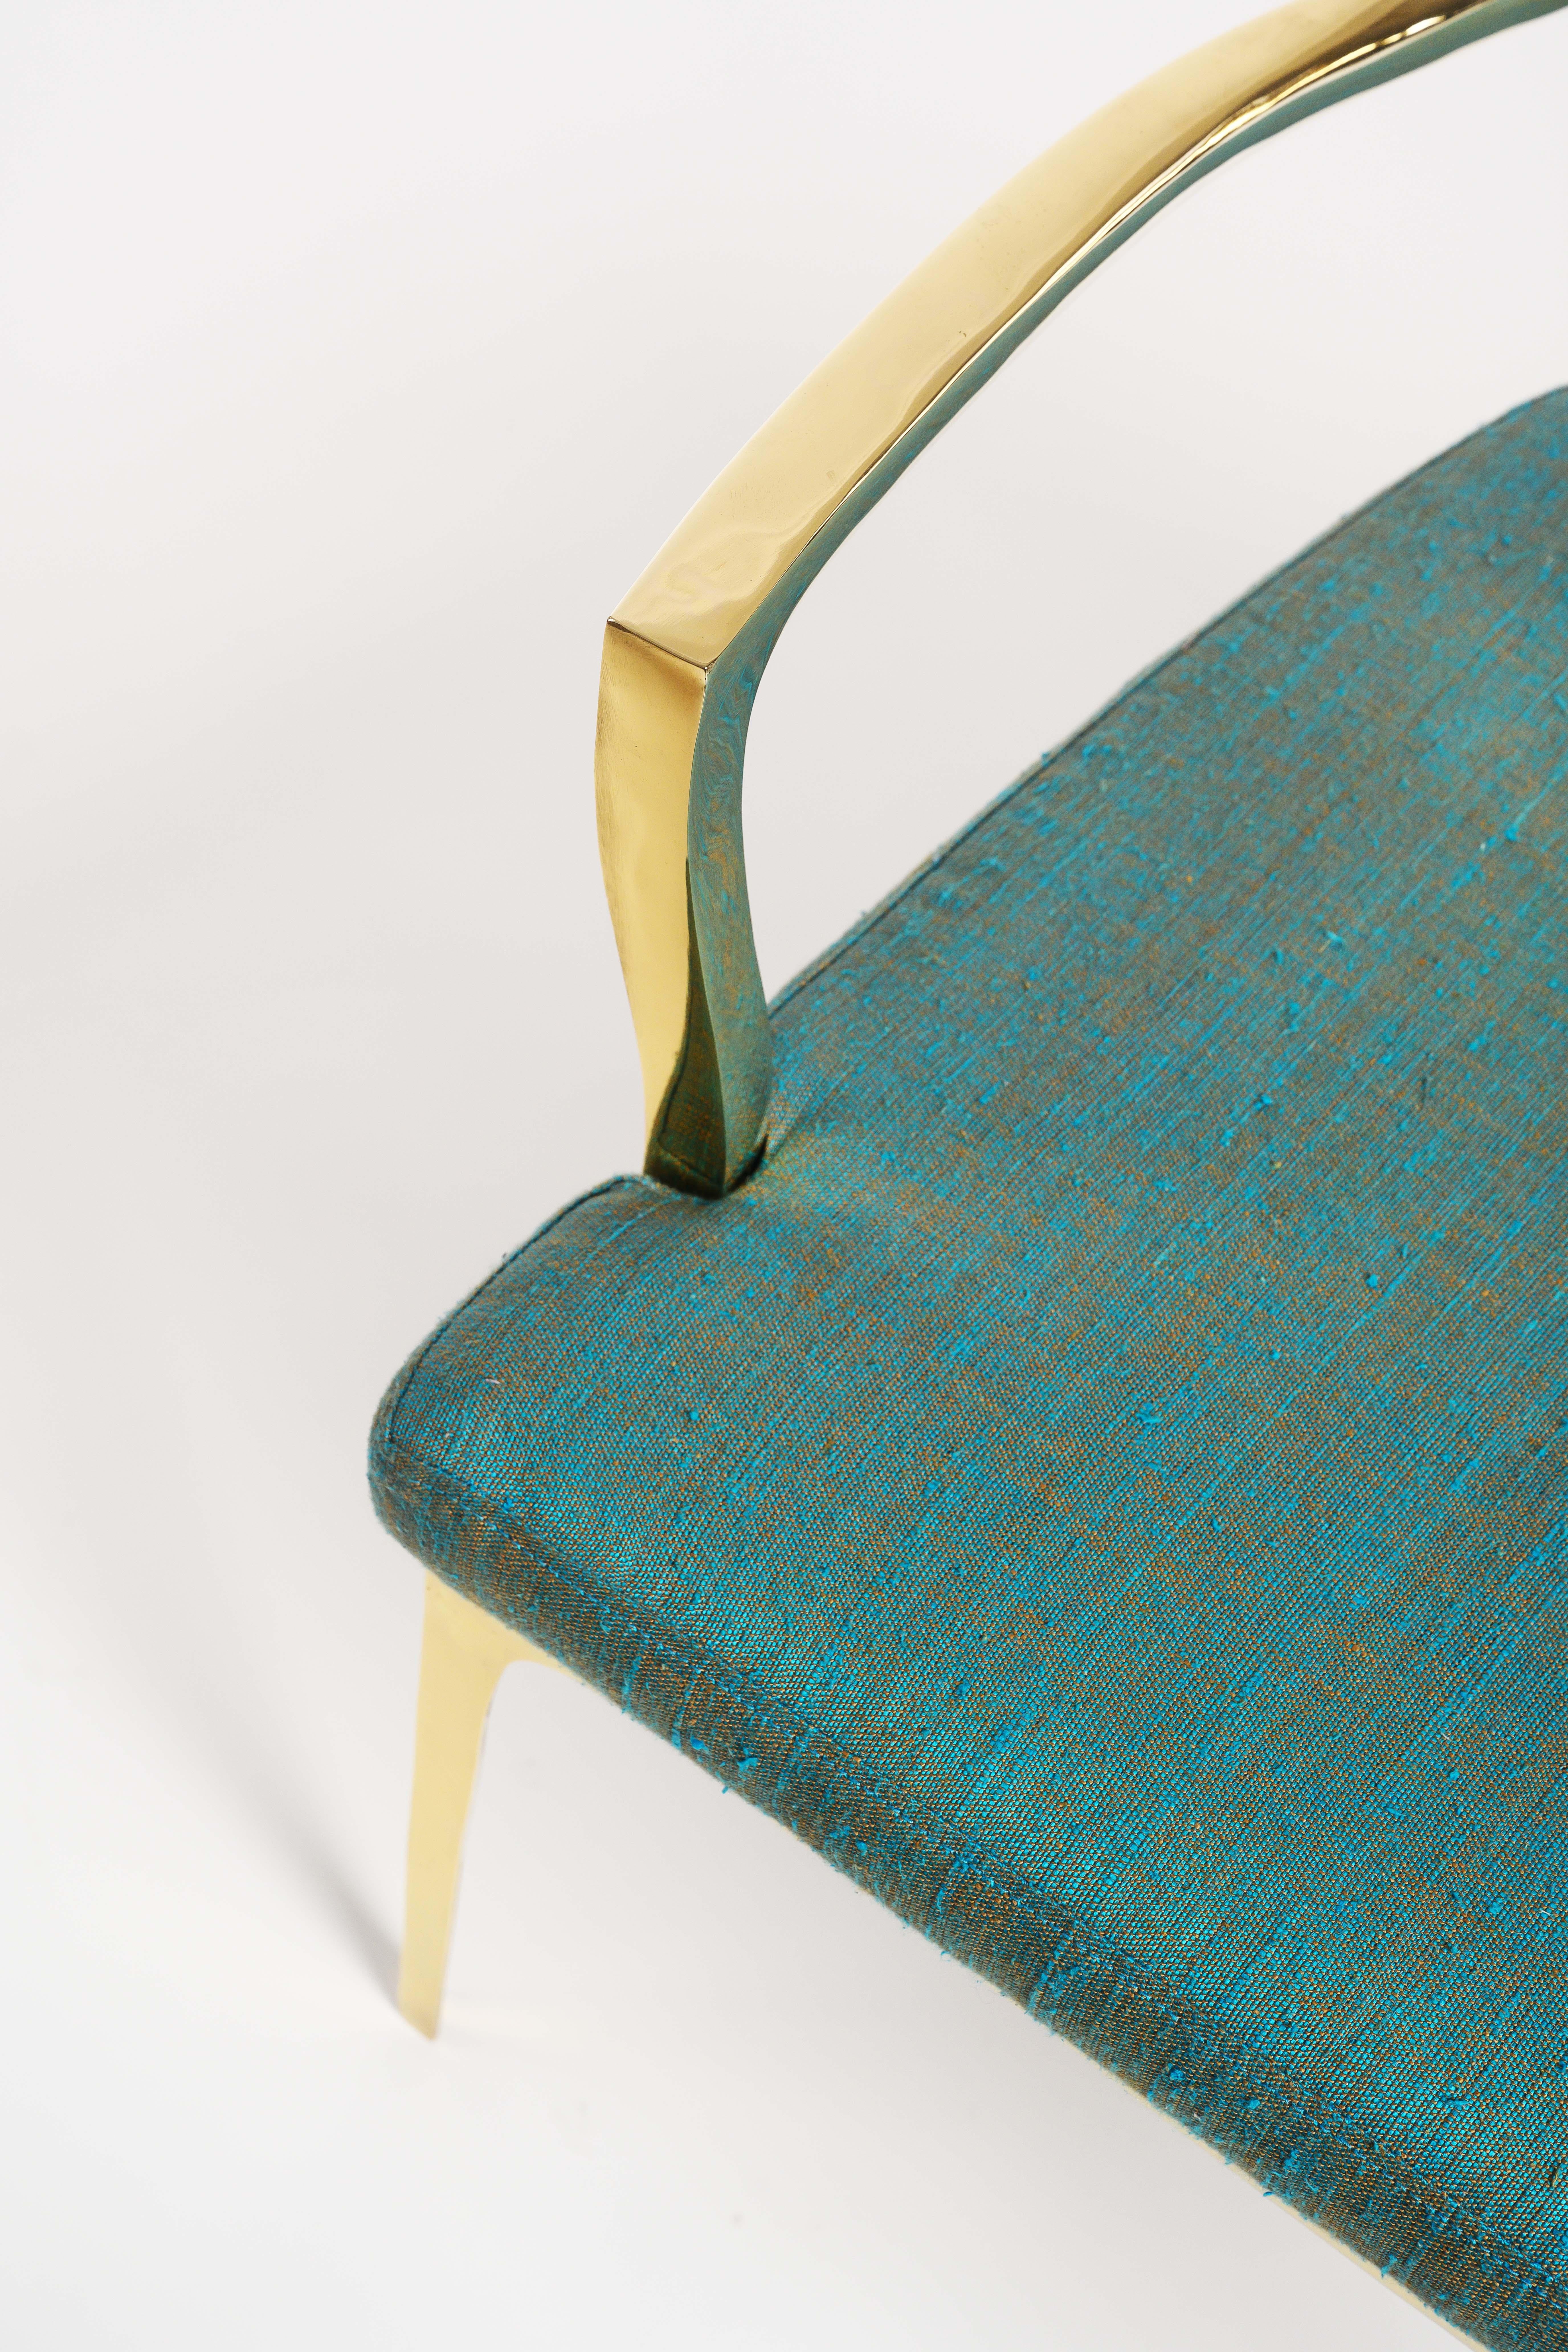 Available now and ready to ship!

Polished gold bronze bruda armchair with marine silk by Elan Atelier

Handmade using the lost wax cast method, the Bruda is a contemporary polished gold bronze armchair with marine silk (Green Blue) upholstery.